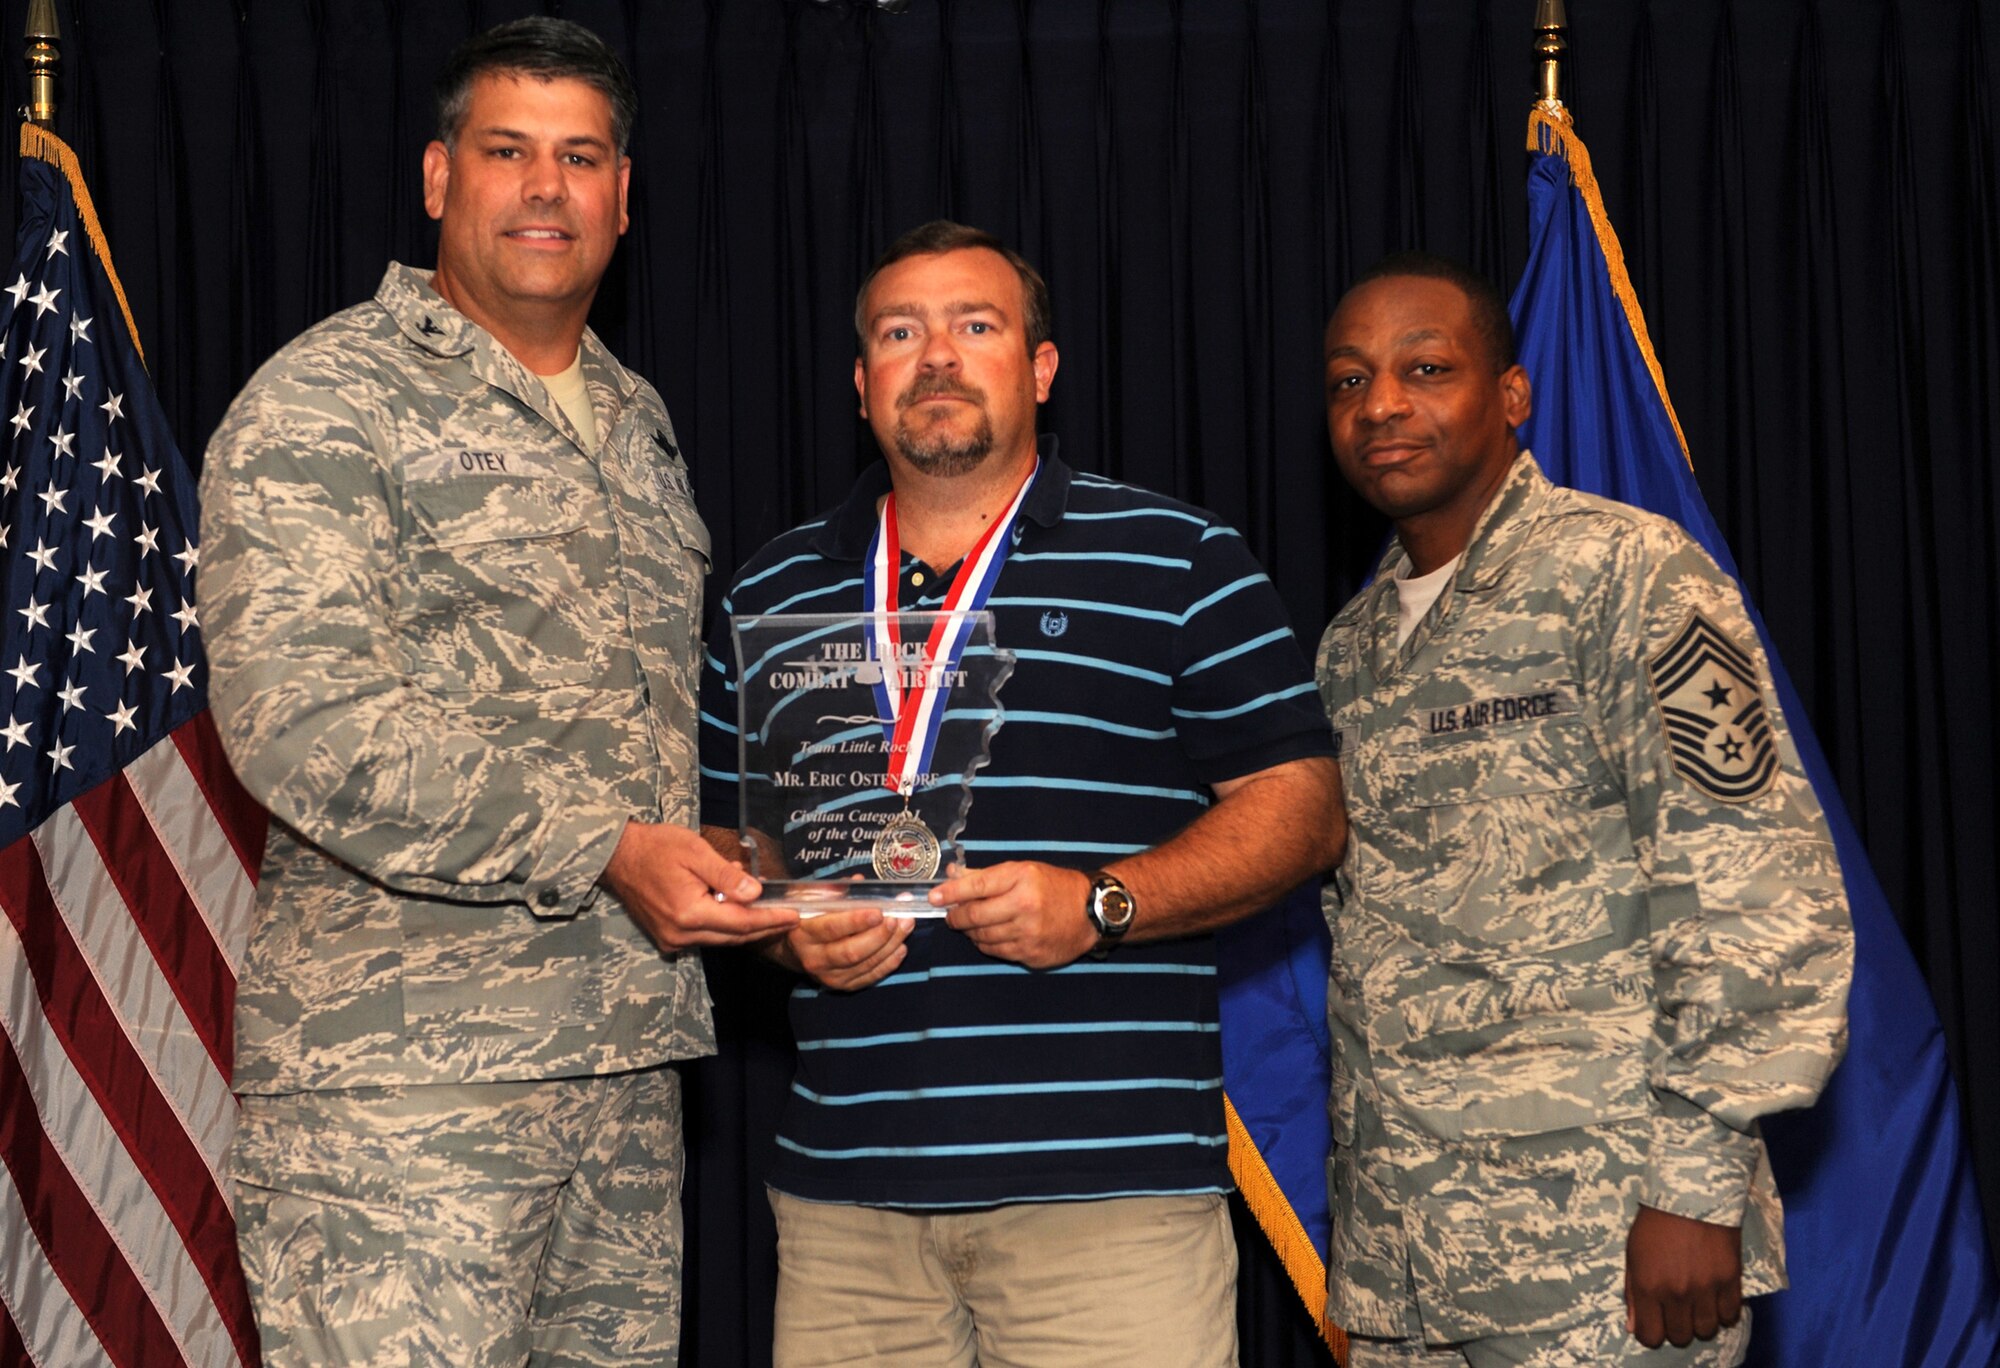 Col. Greg Otey, 19th Airlift Wing commander, and Chief Master Sgt. Anthony Brinkley, 19th Airlift Wing command chief, presents Eric Ostendorf, 19th Civil Engineer Squadron, quarterly award for civilian category 1 at Little Rock Air Force Base, Ark. July 30. (U. S. Air Force photo by Senior Airman Jim Araos)